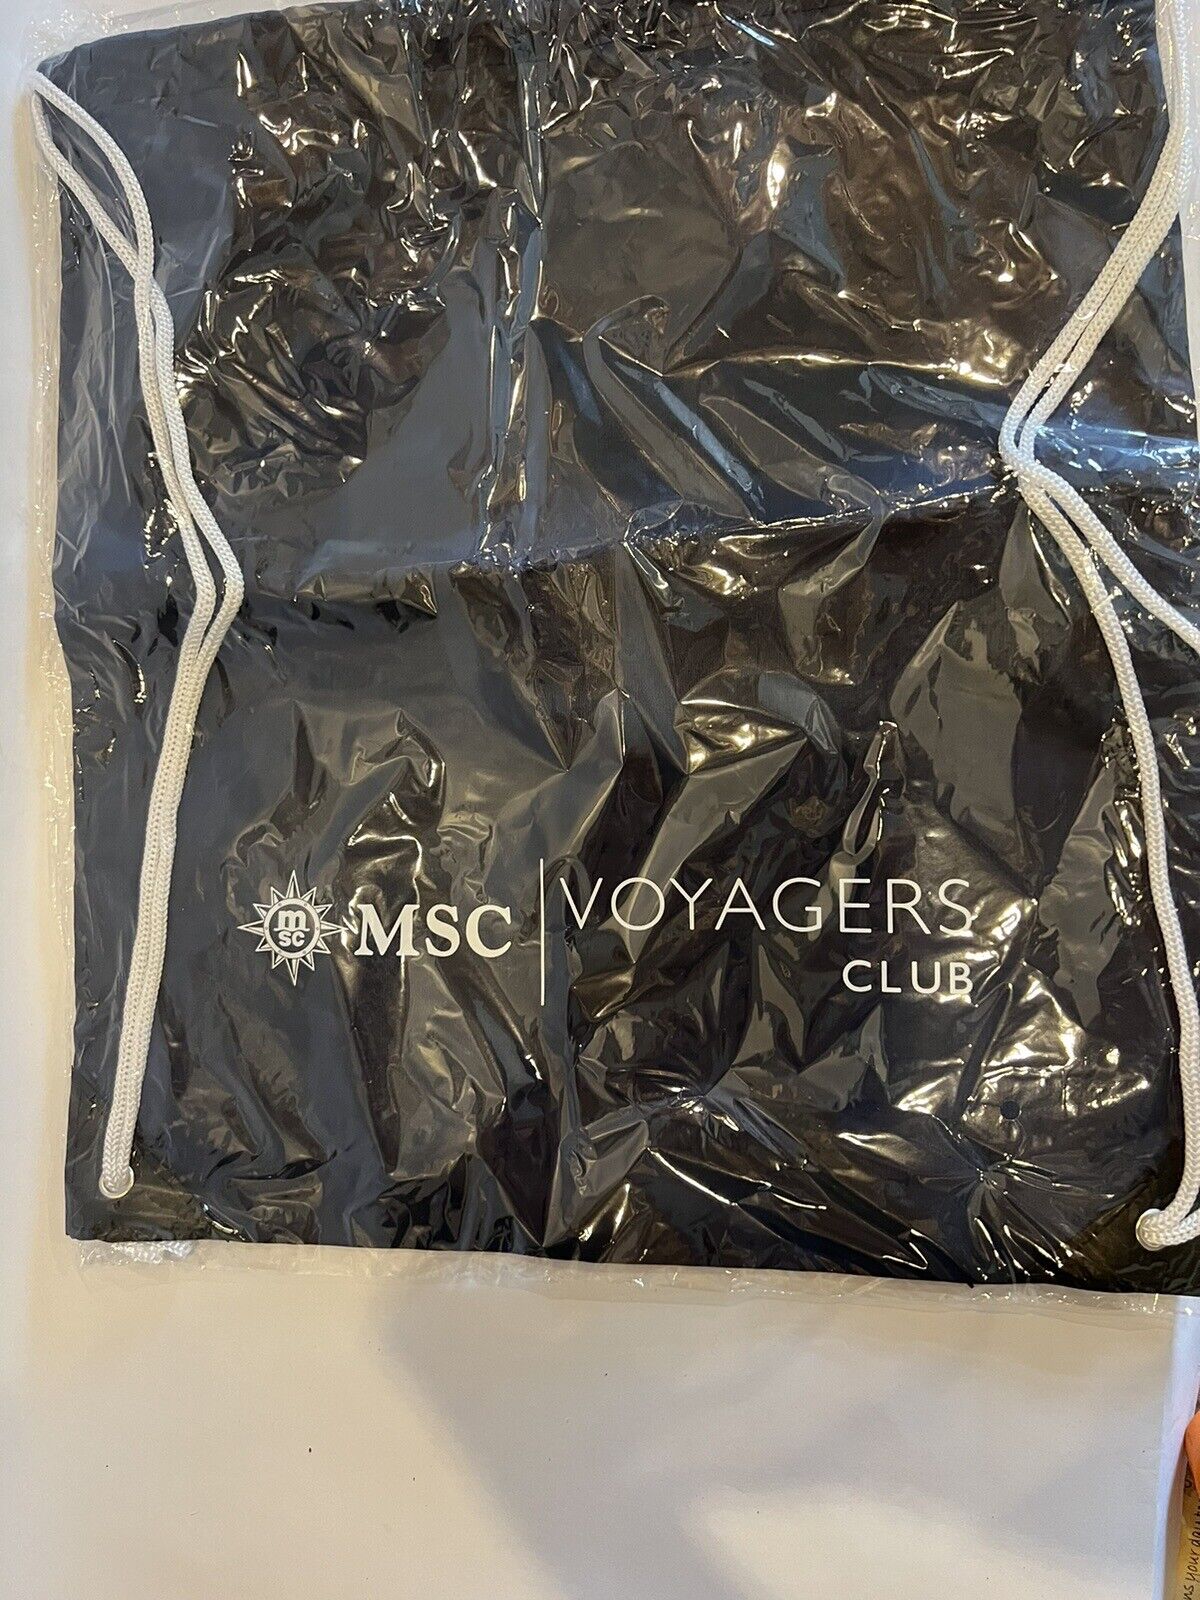 MSC Voyagers String Bag. New Sealed In Plastic Fun Thing For Your Next Cruise